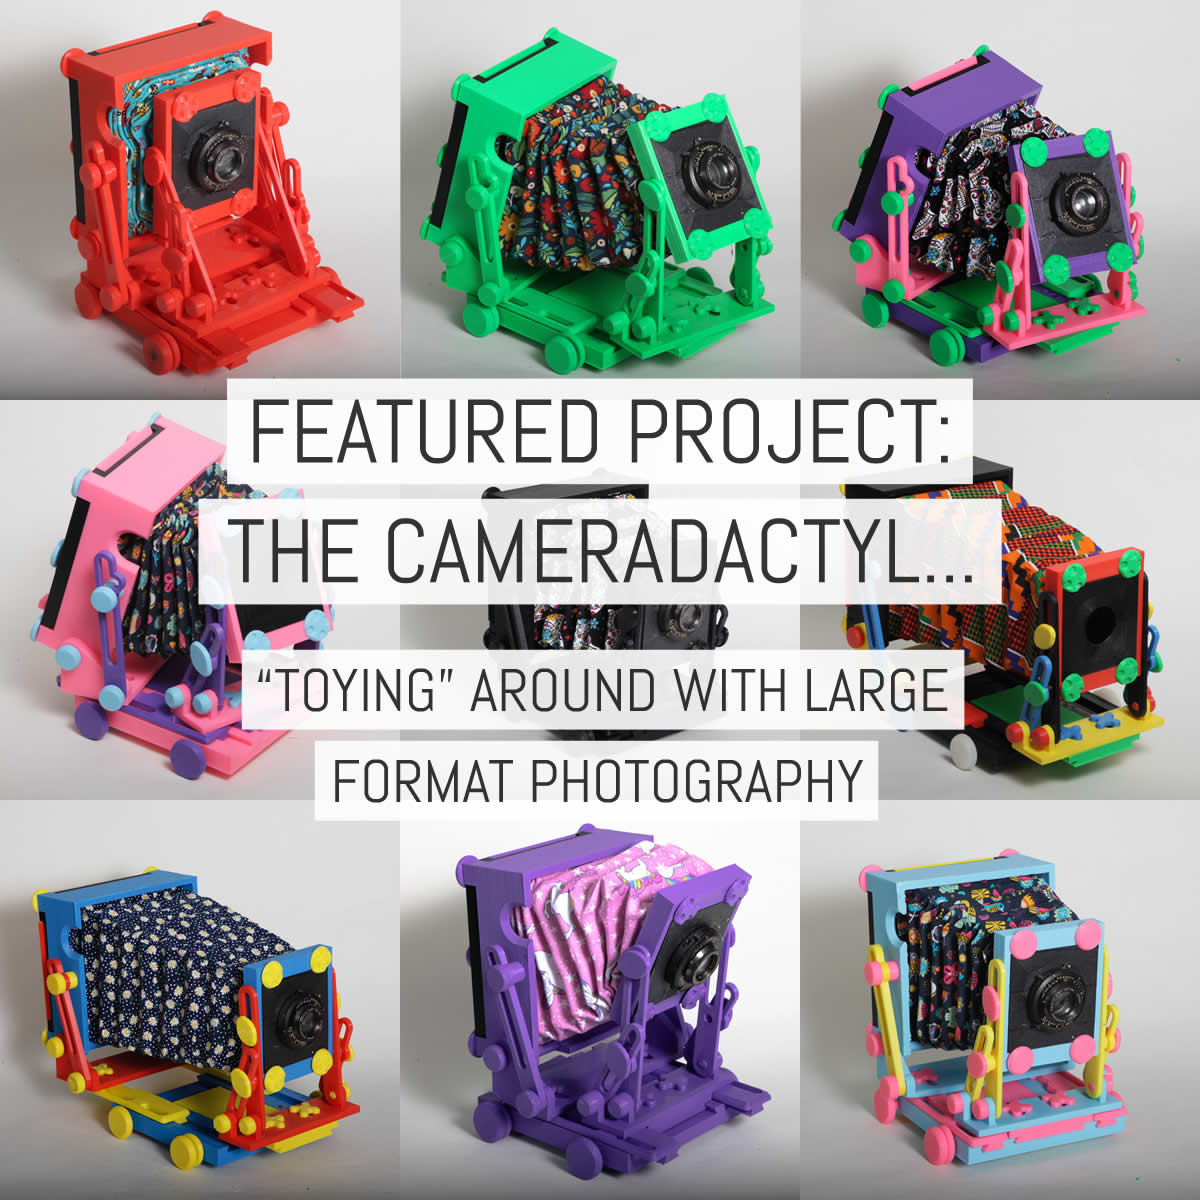 Cover - Featured project - The CAMERADACTYL 4X5 field camera -toying around with large format photography - by Ethan Moses